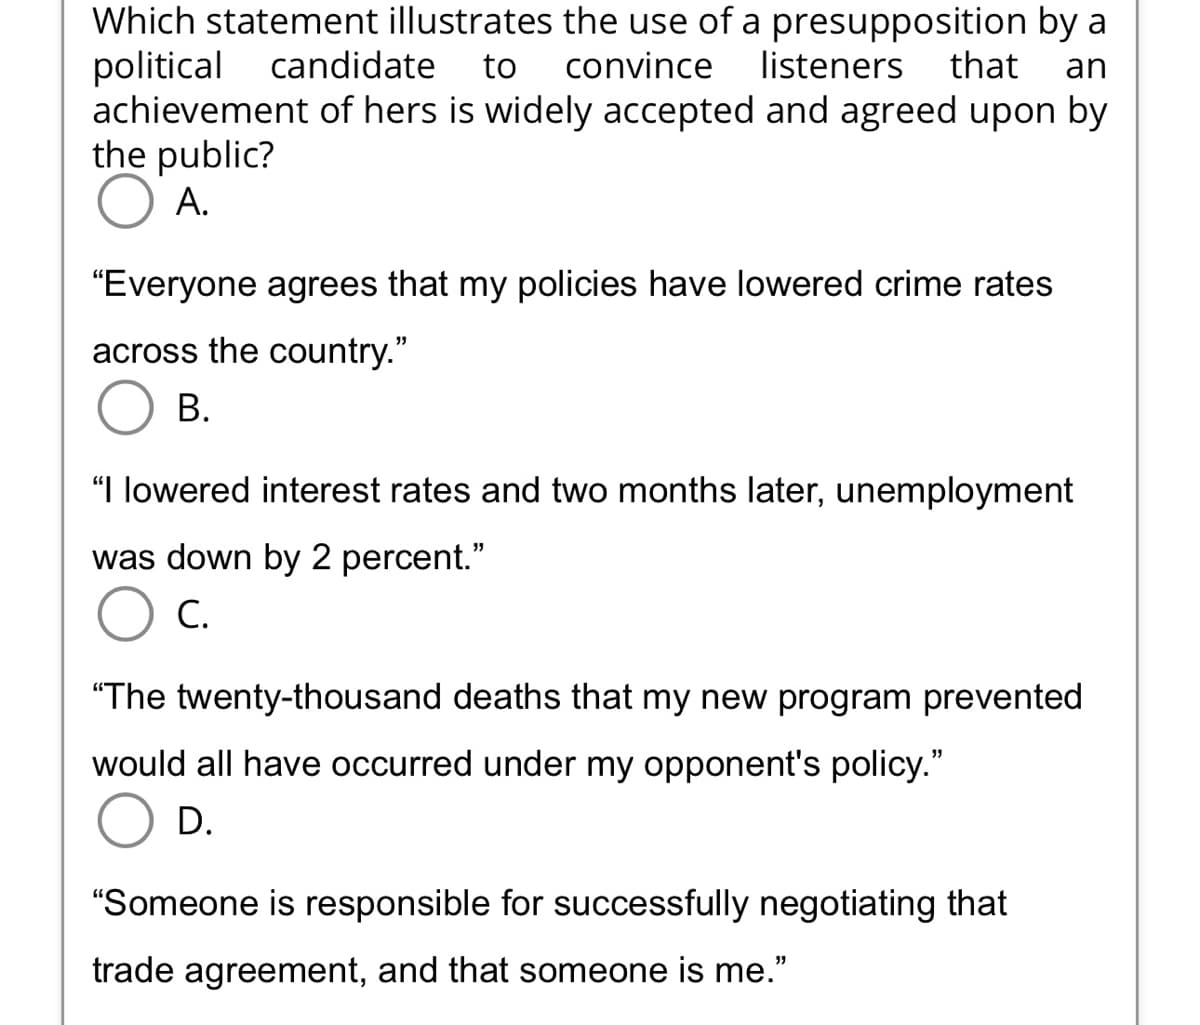 Which statement illustrates the use of a presupposition by a
political candidate to convince listeners that an
achievement of hers is widely accepted and agreed upon by
the public?
A.
"Everyone agrees that my policies have lowered crime rates
across the country."
B.
"I lowered interest rates and two months later, unemployment
was down by 2 percent."
C.
"The twenty-thousand deaths that my new program prevented
would all have occurred under my opponent's policy."
D.
"Someone is responsible for successfully negotiating that
trade agreement, and that someone is me."